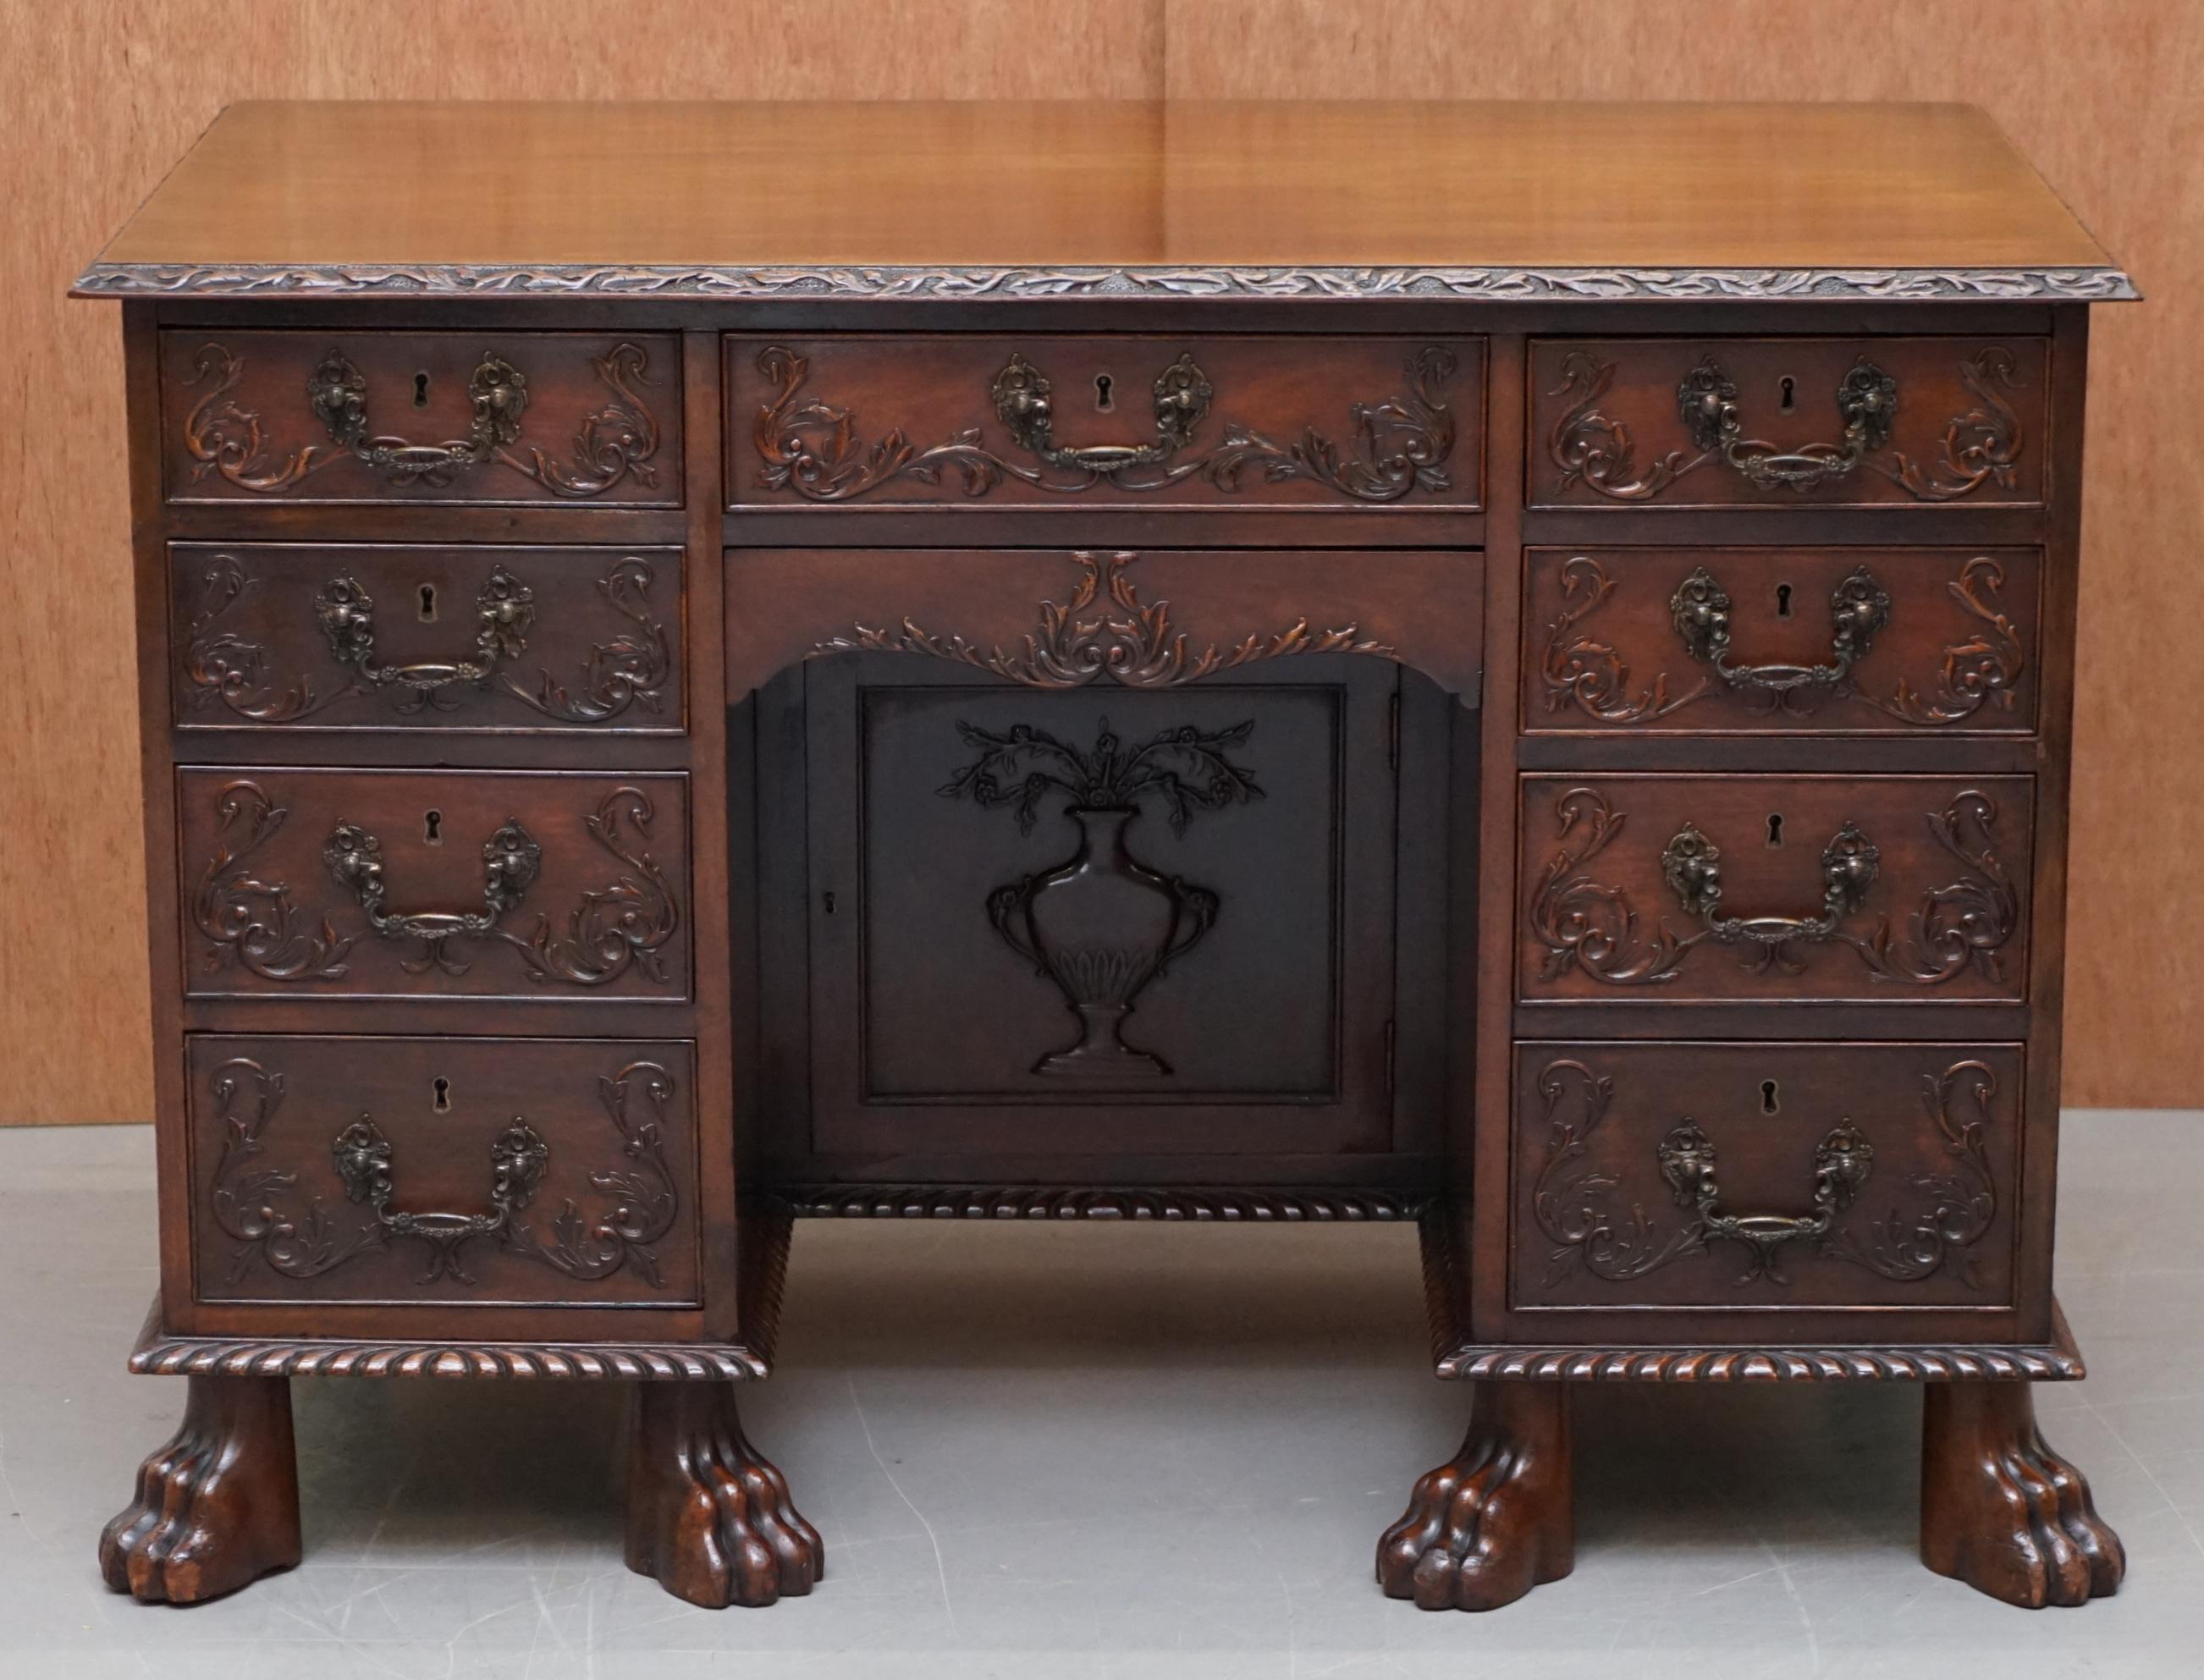 We are delighted to offer for sale this stunning and really quite rare original early Victorian hand carved solid mahogany Knee hole desk

A very decorative piece, originally made as an ornate and very decorative kneehole desk, now it could be